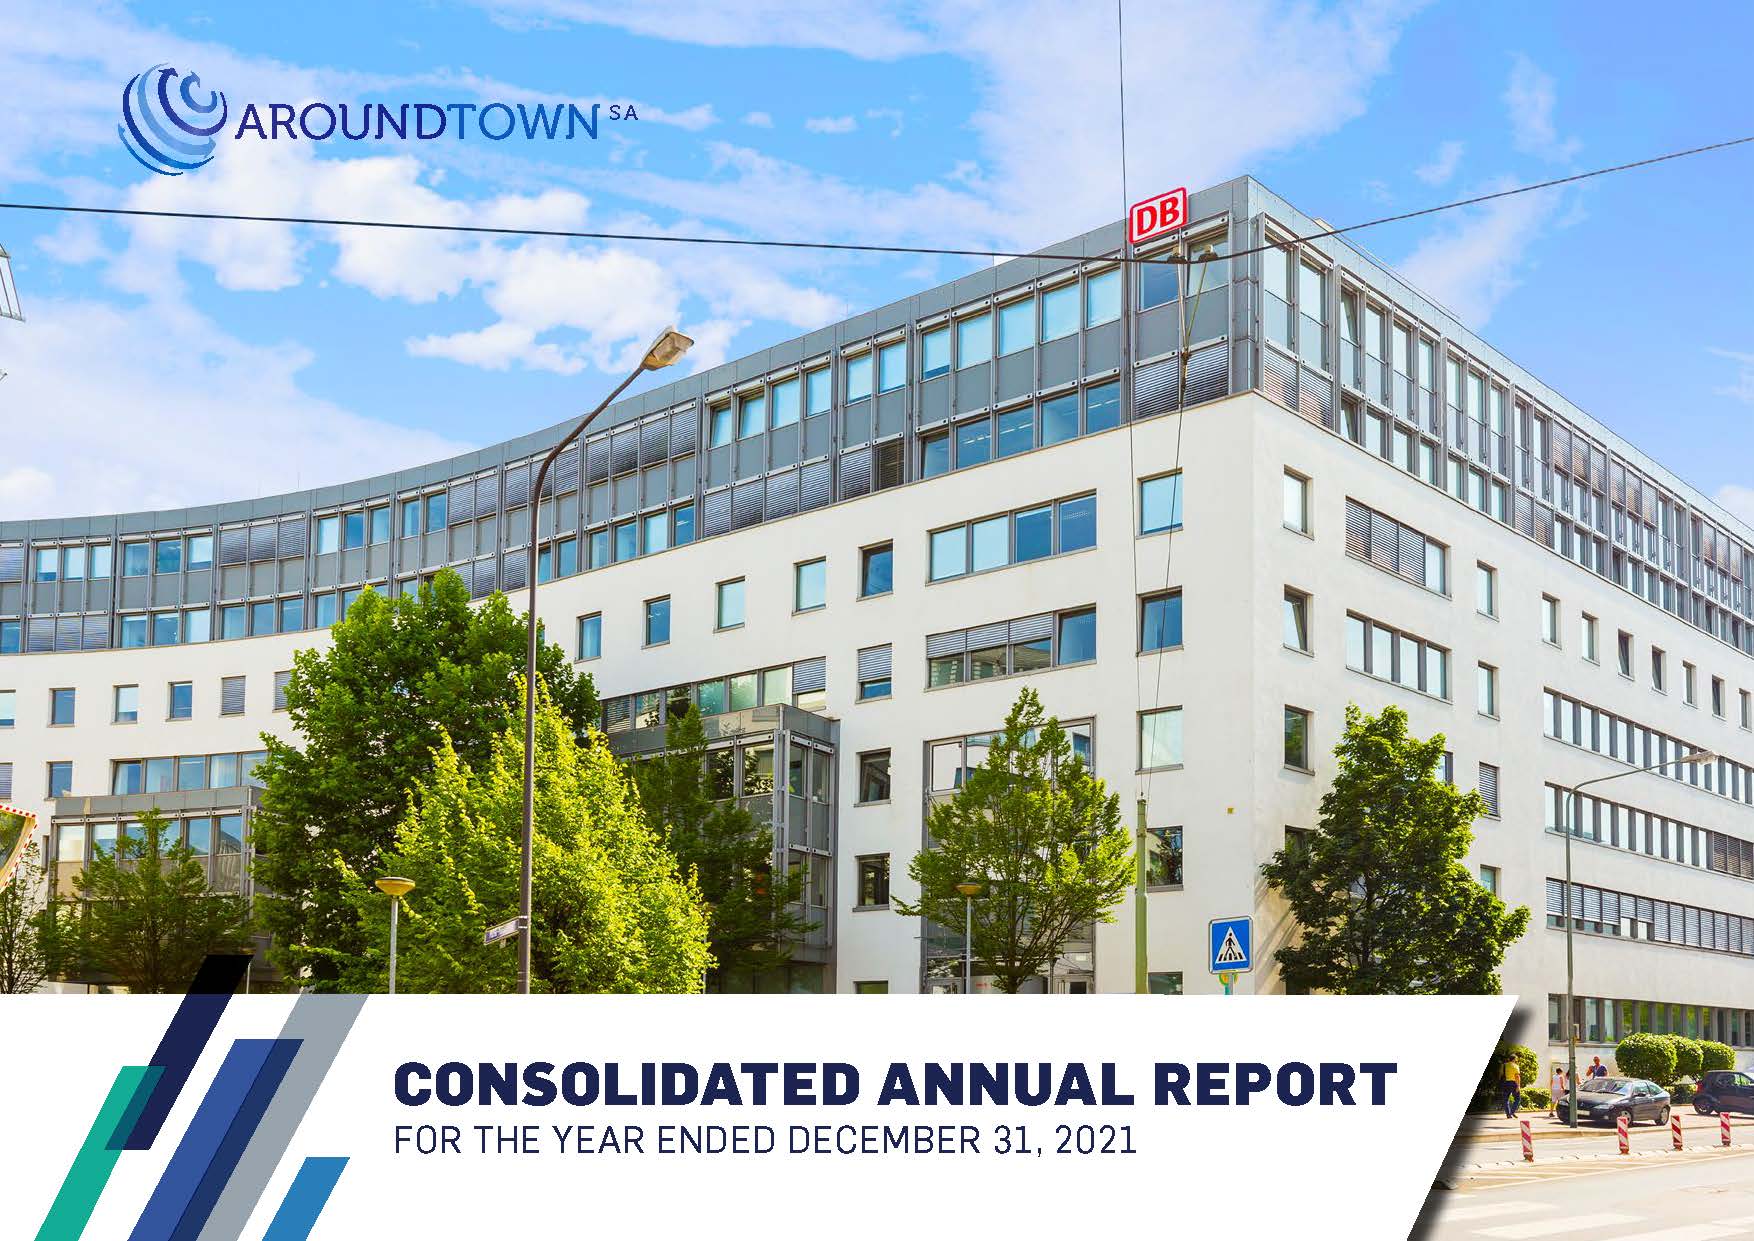 FY 2021 Consolidated Annual Report